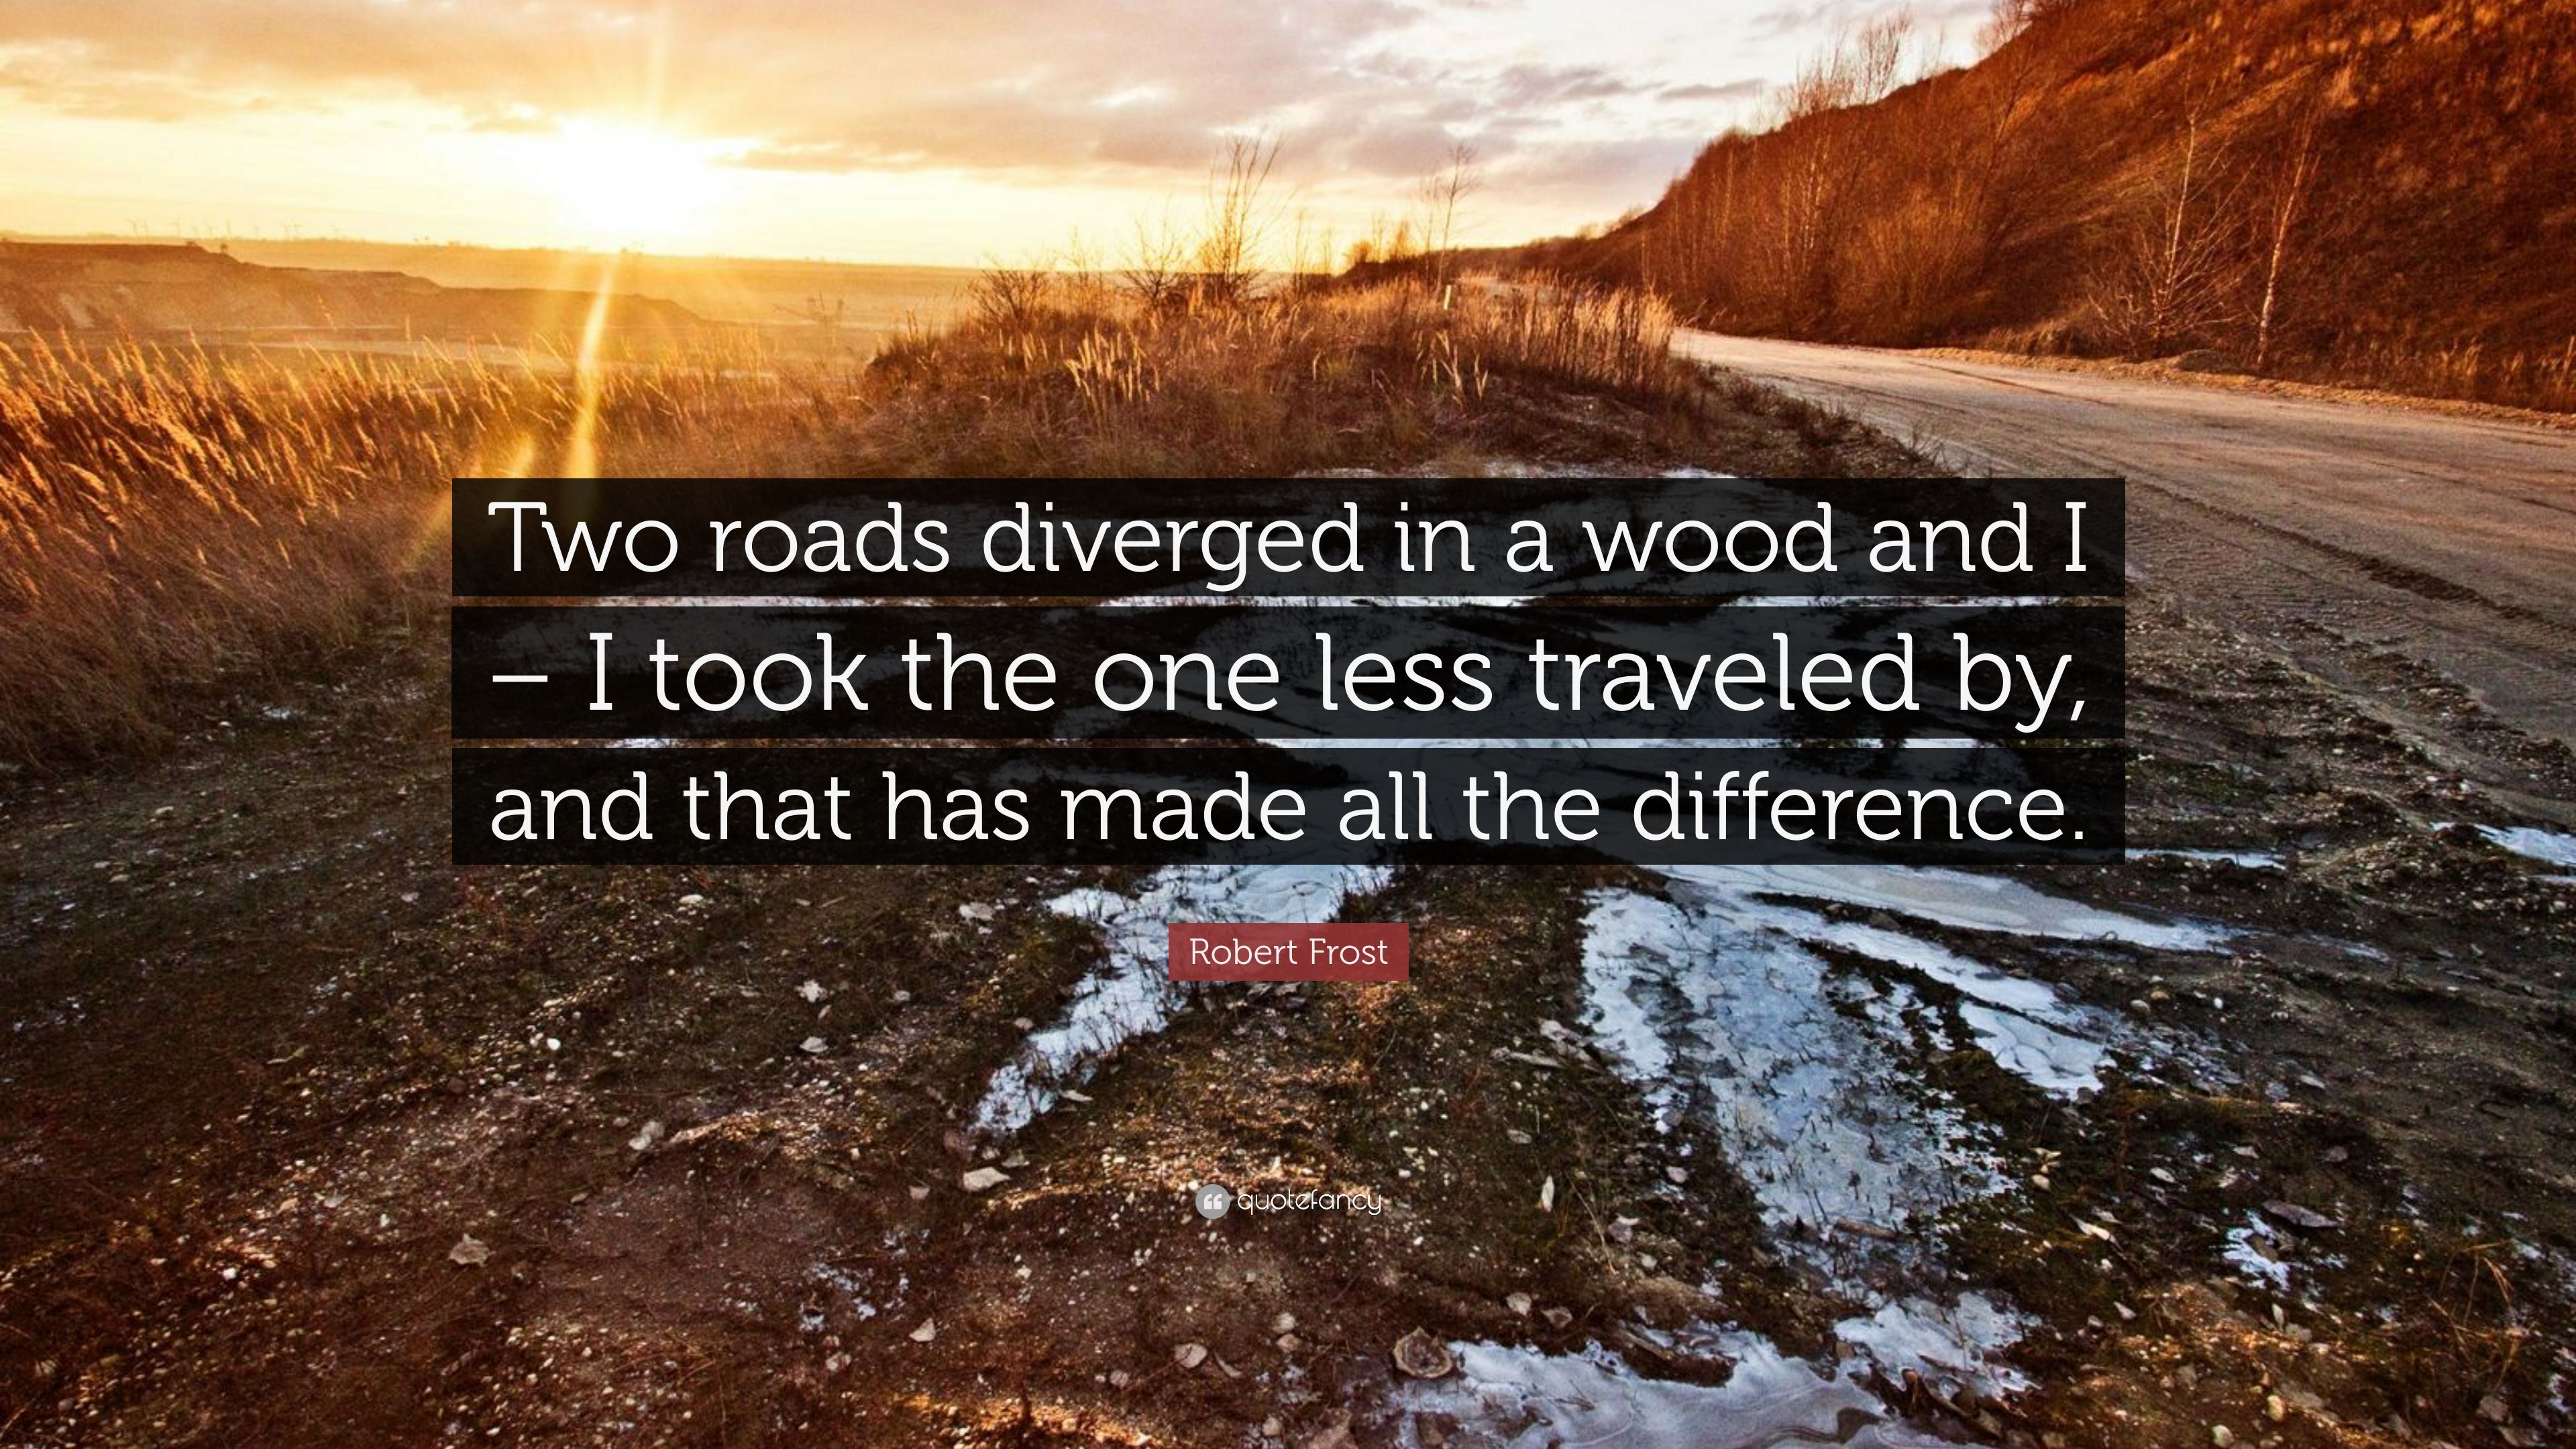 Robert Frost Quote: “Two roads diverged .quotefancy.com